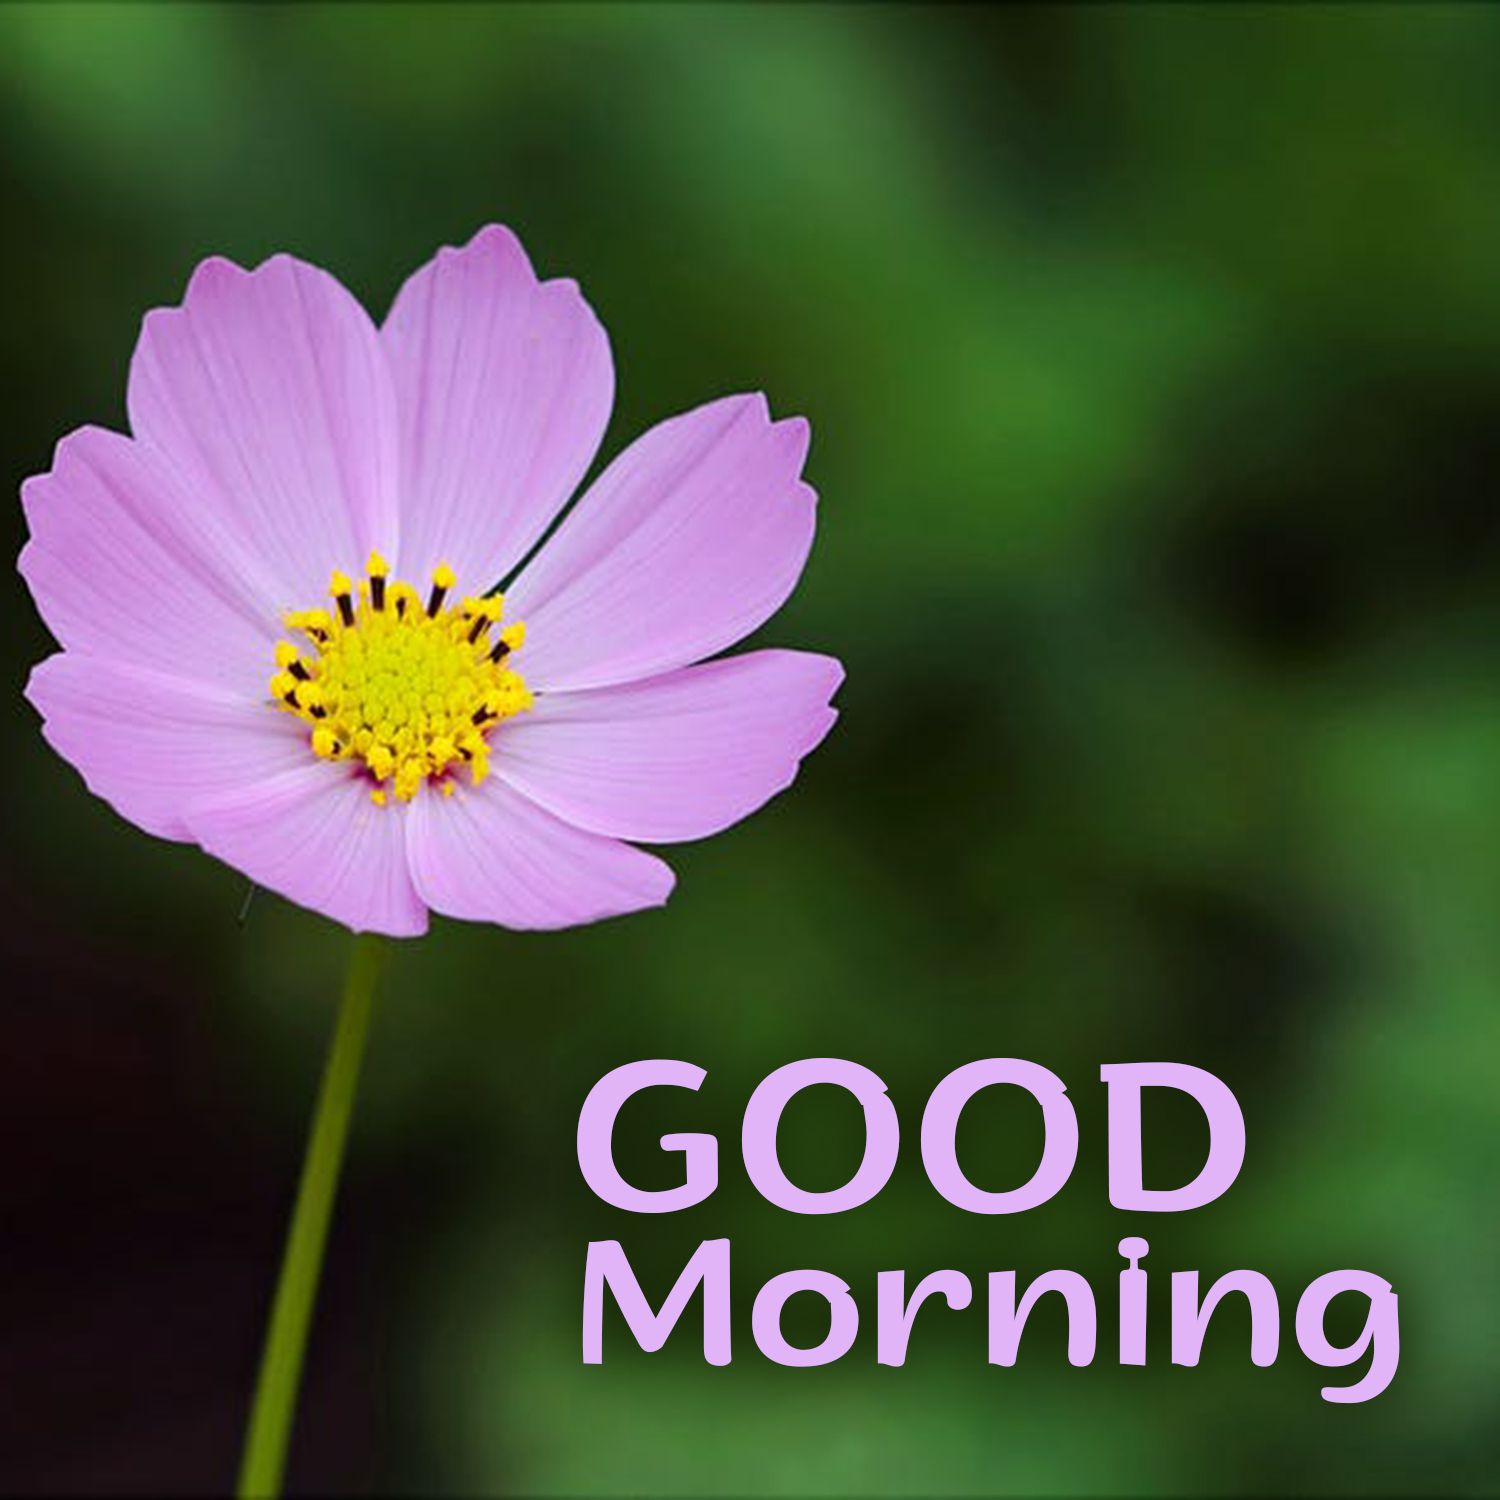 Images Of Good Morning With Flowers